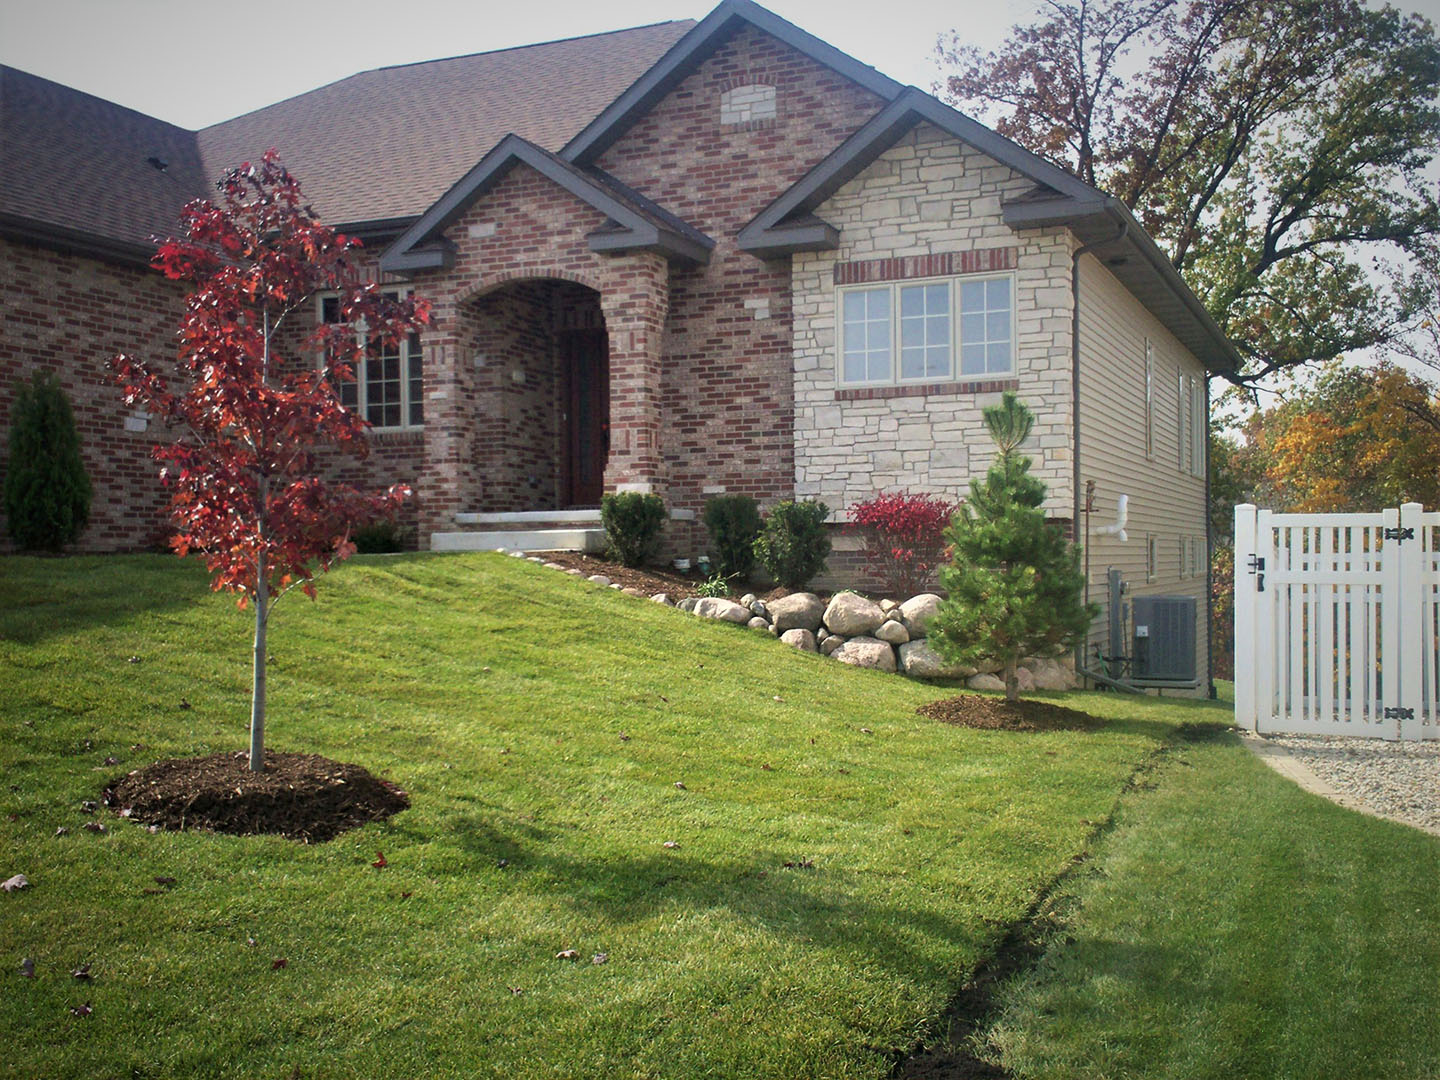 We make certain our design add curb appeal and compliment the beauty of your home